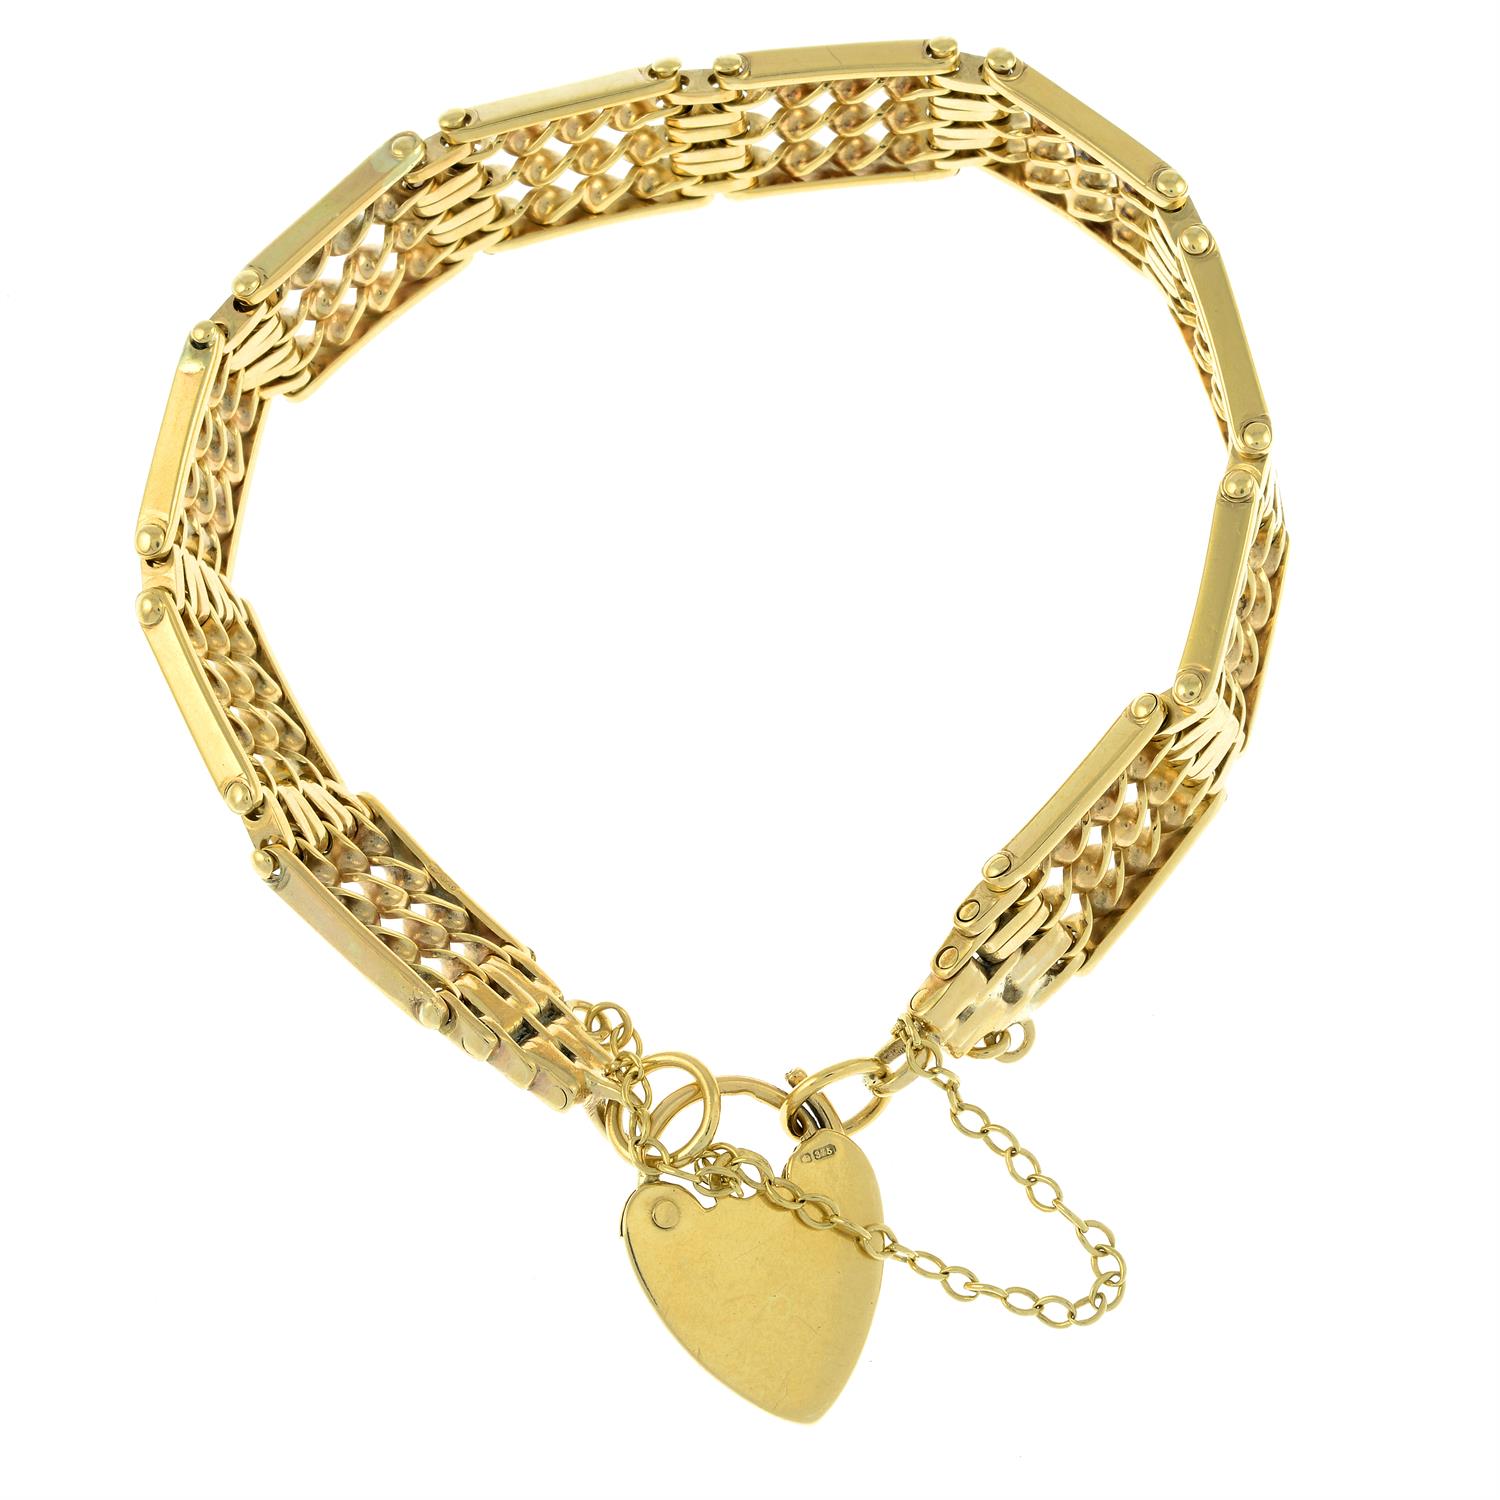 A 9ct gold fancy-link bracelet, with heart-shape padlock clasp. - Image 2 of 2